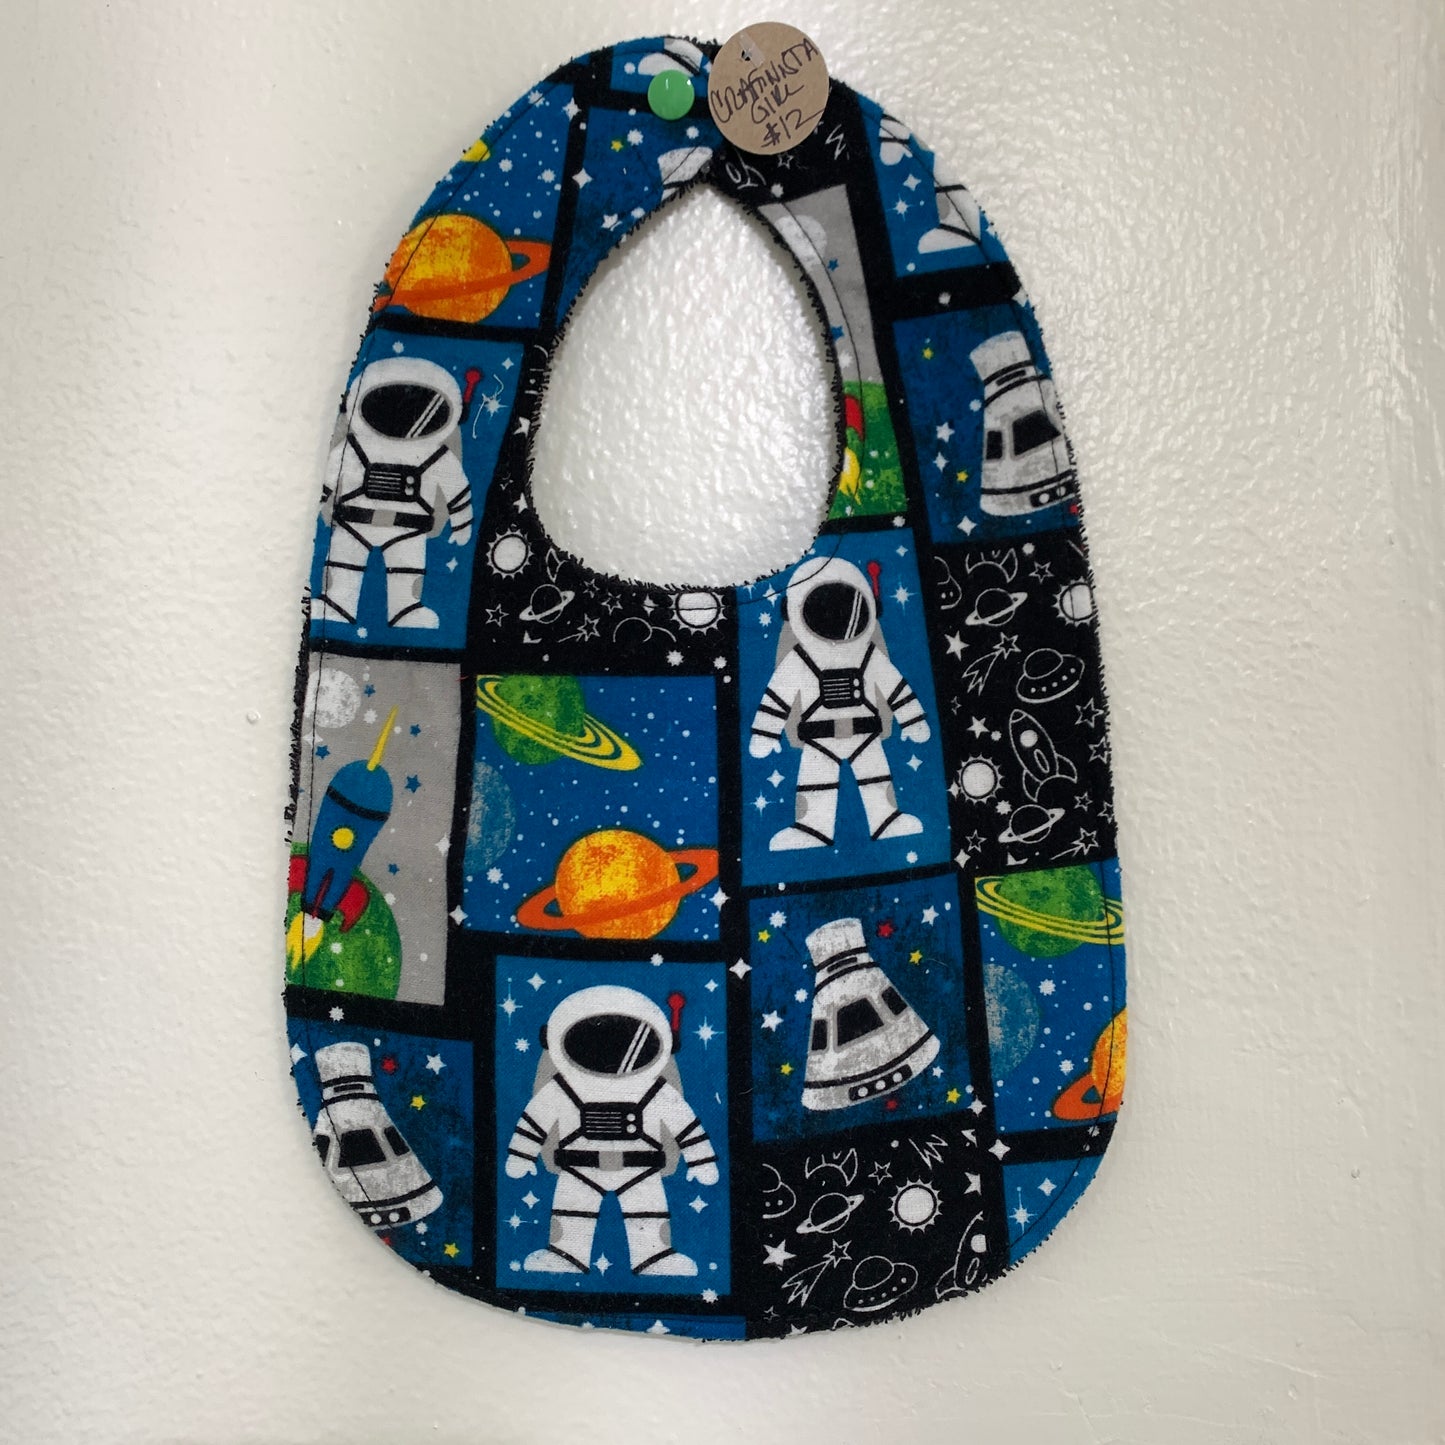 Terry Cloth Bibs by Craftinista Girl